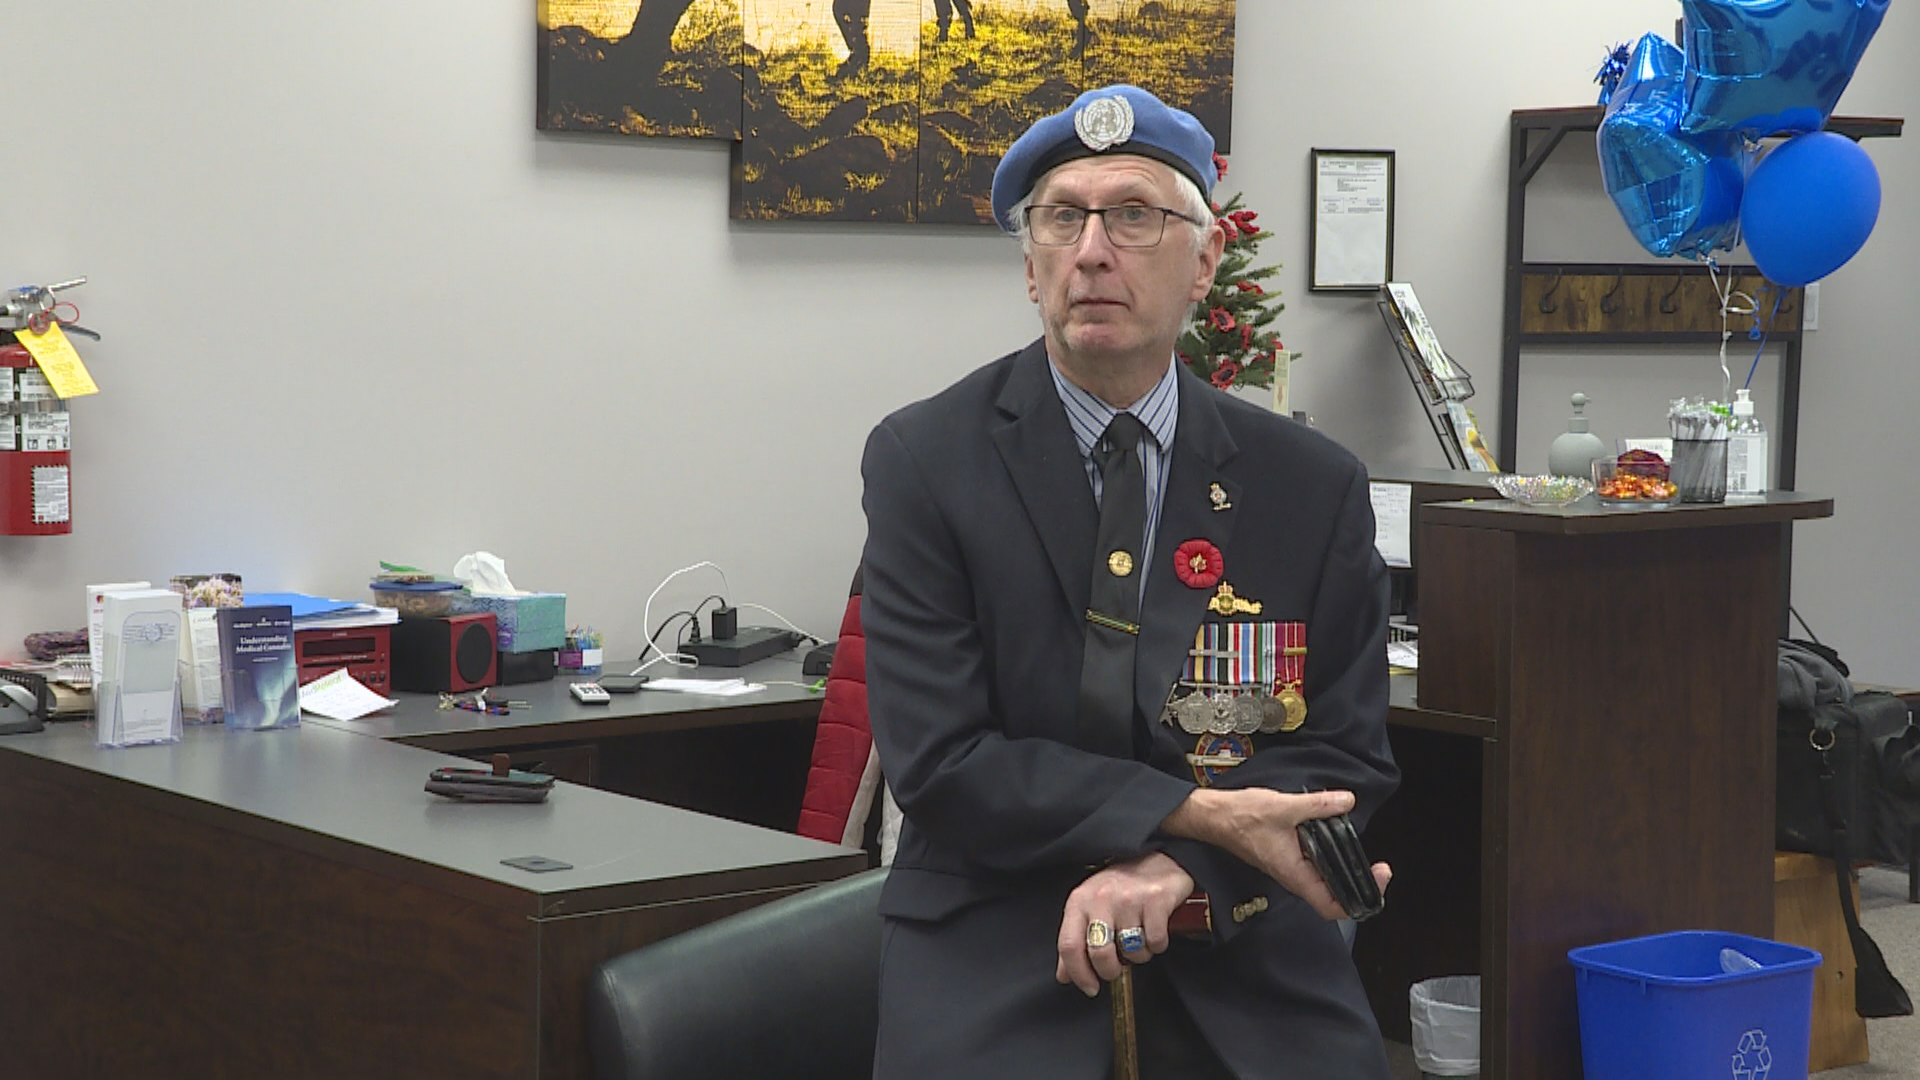 Veteran Dave McLaughlin says the support and camaraderie he receives through Veterans Alliance has been life-changing.